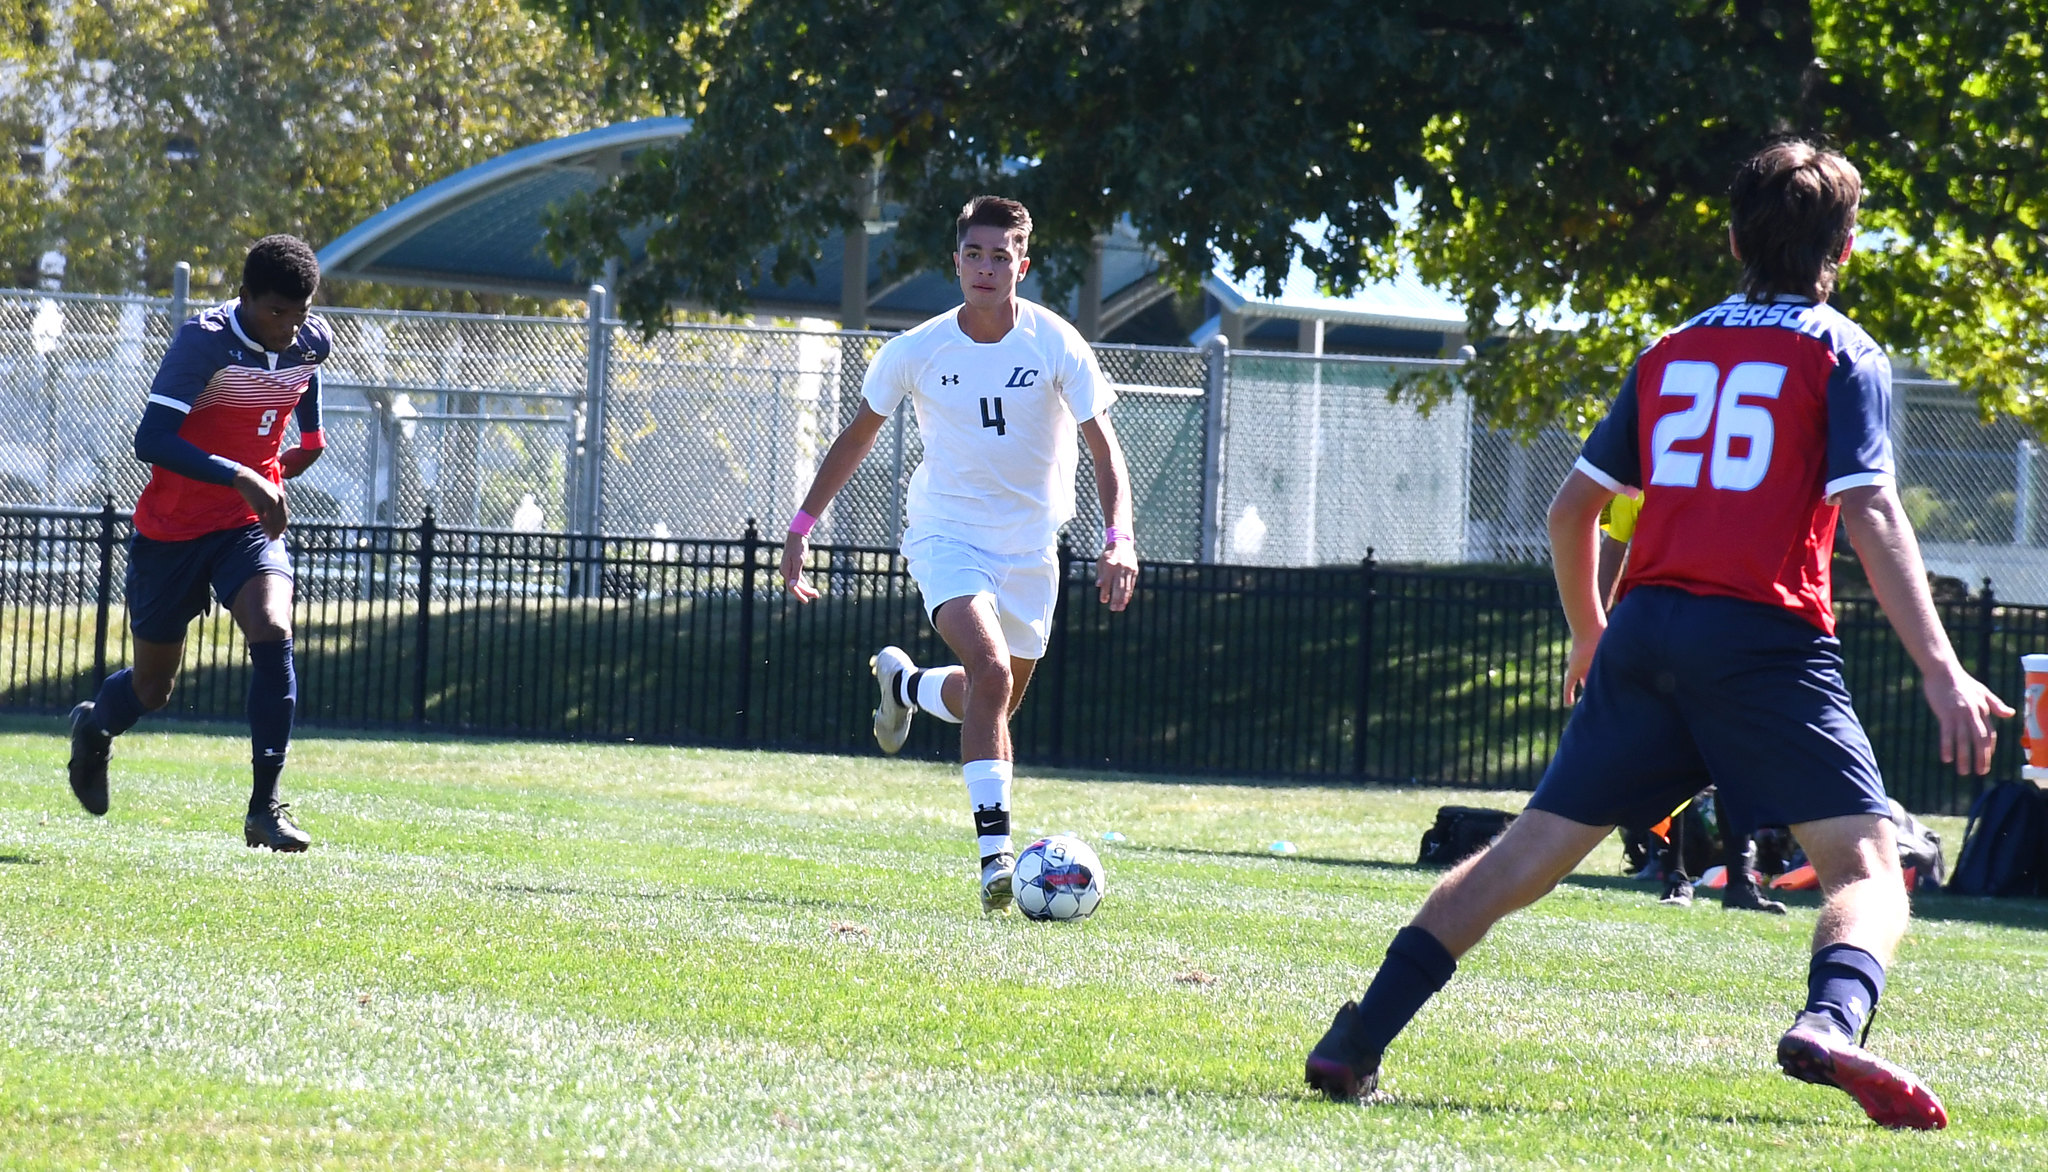 Number 4, Gino Buffa brings the ball down the field.